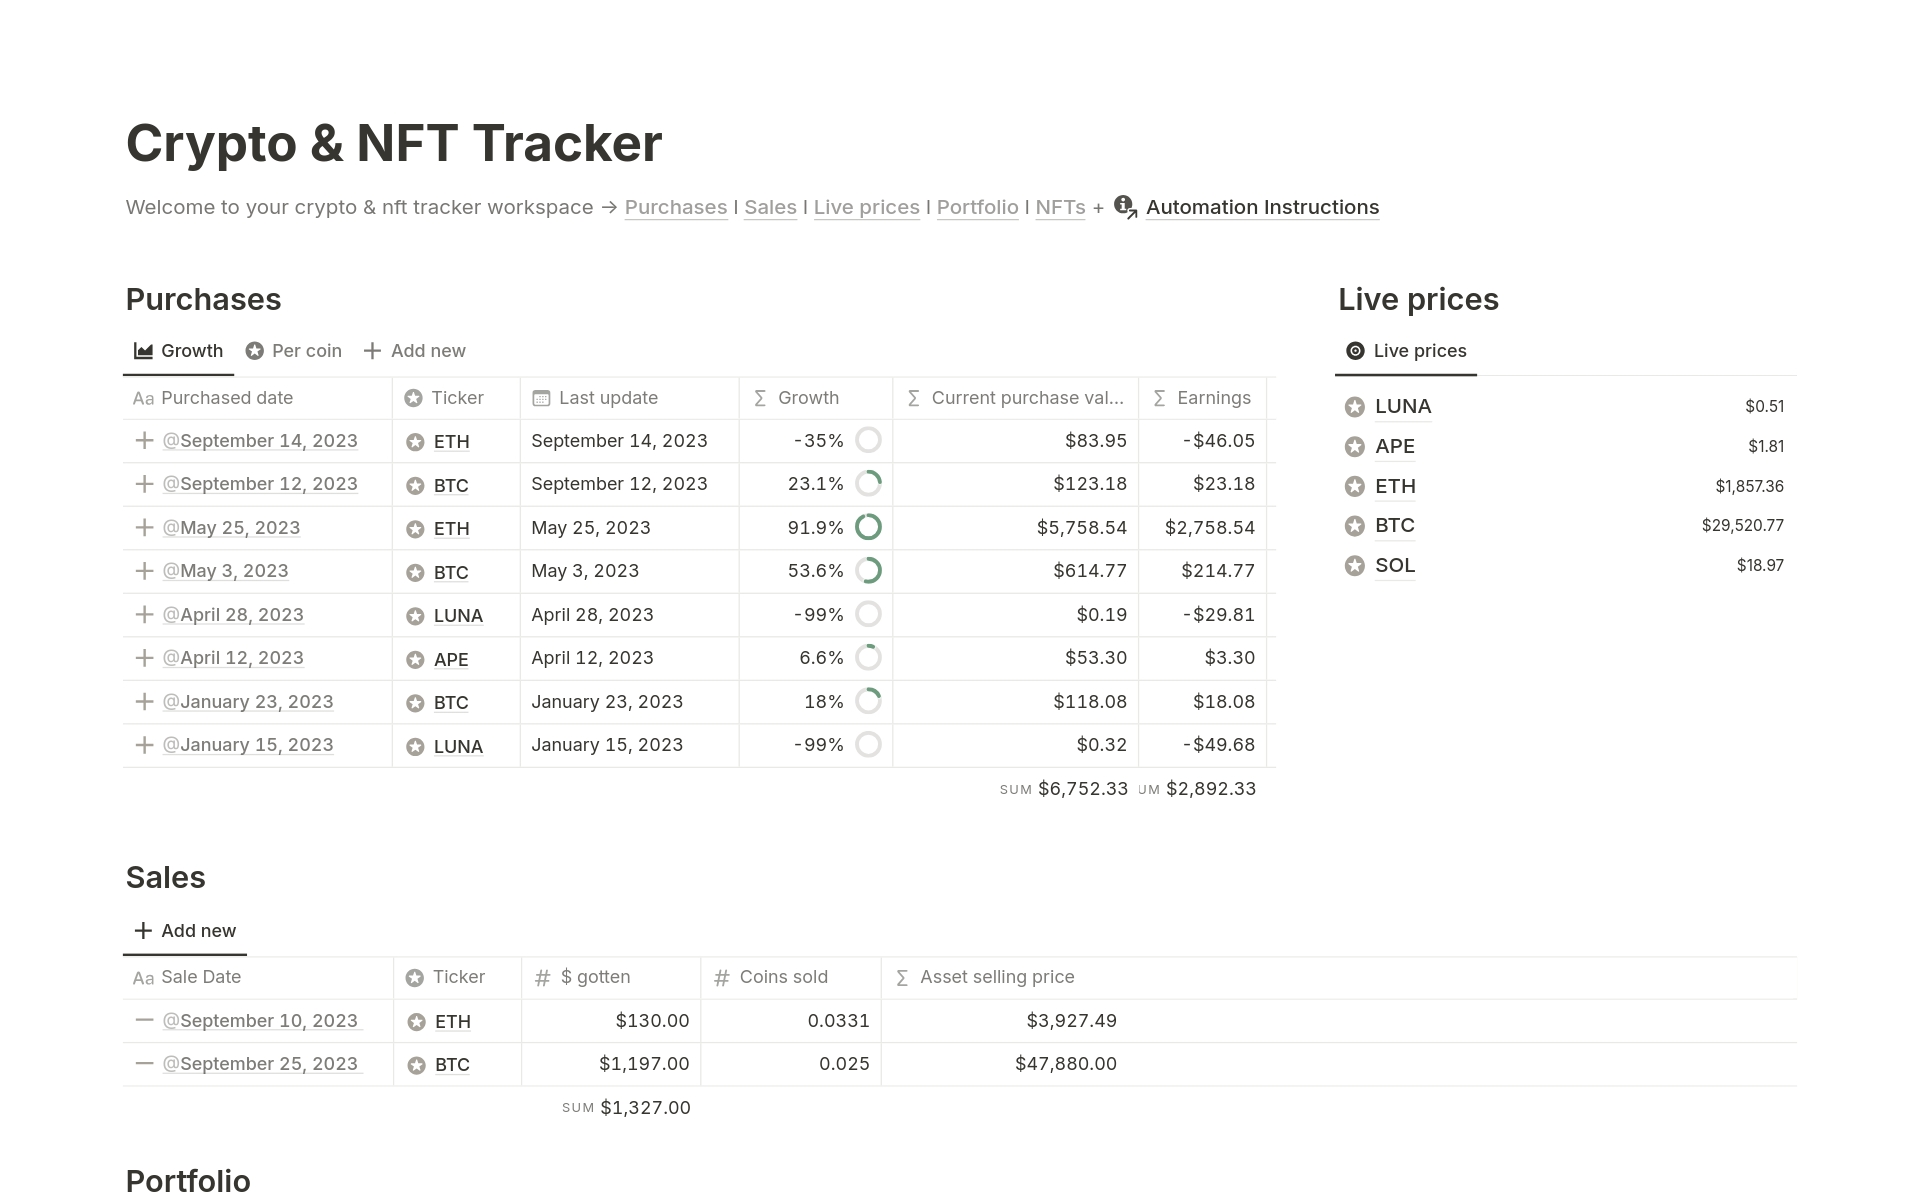 Track your crypto portfolio, from purchases to sales and NFTs, with live asset prices in Notion